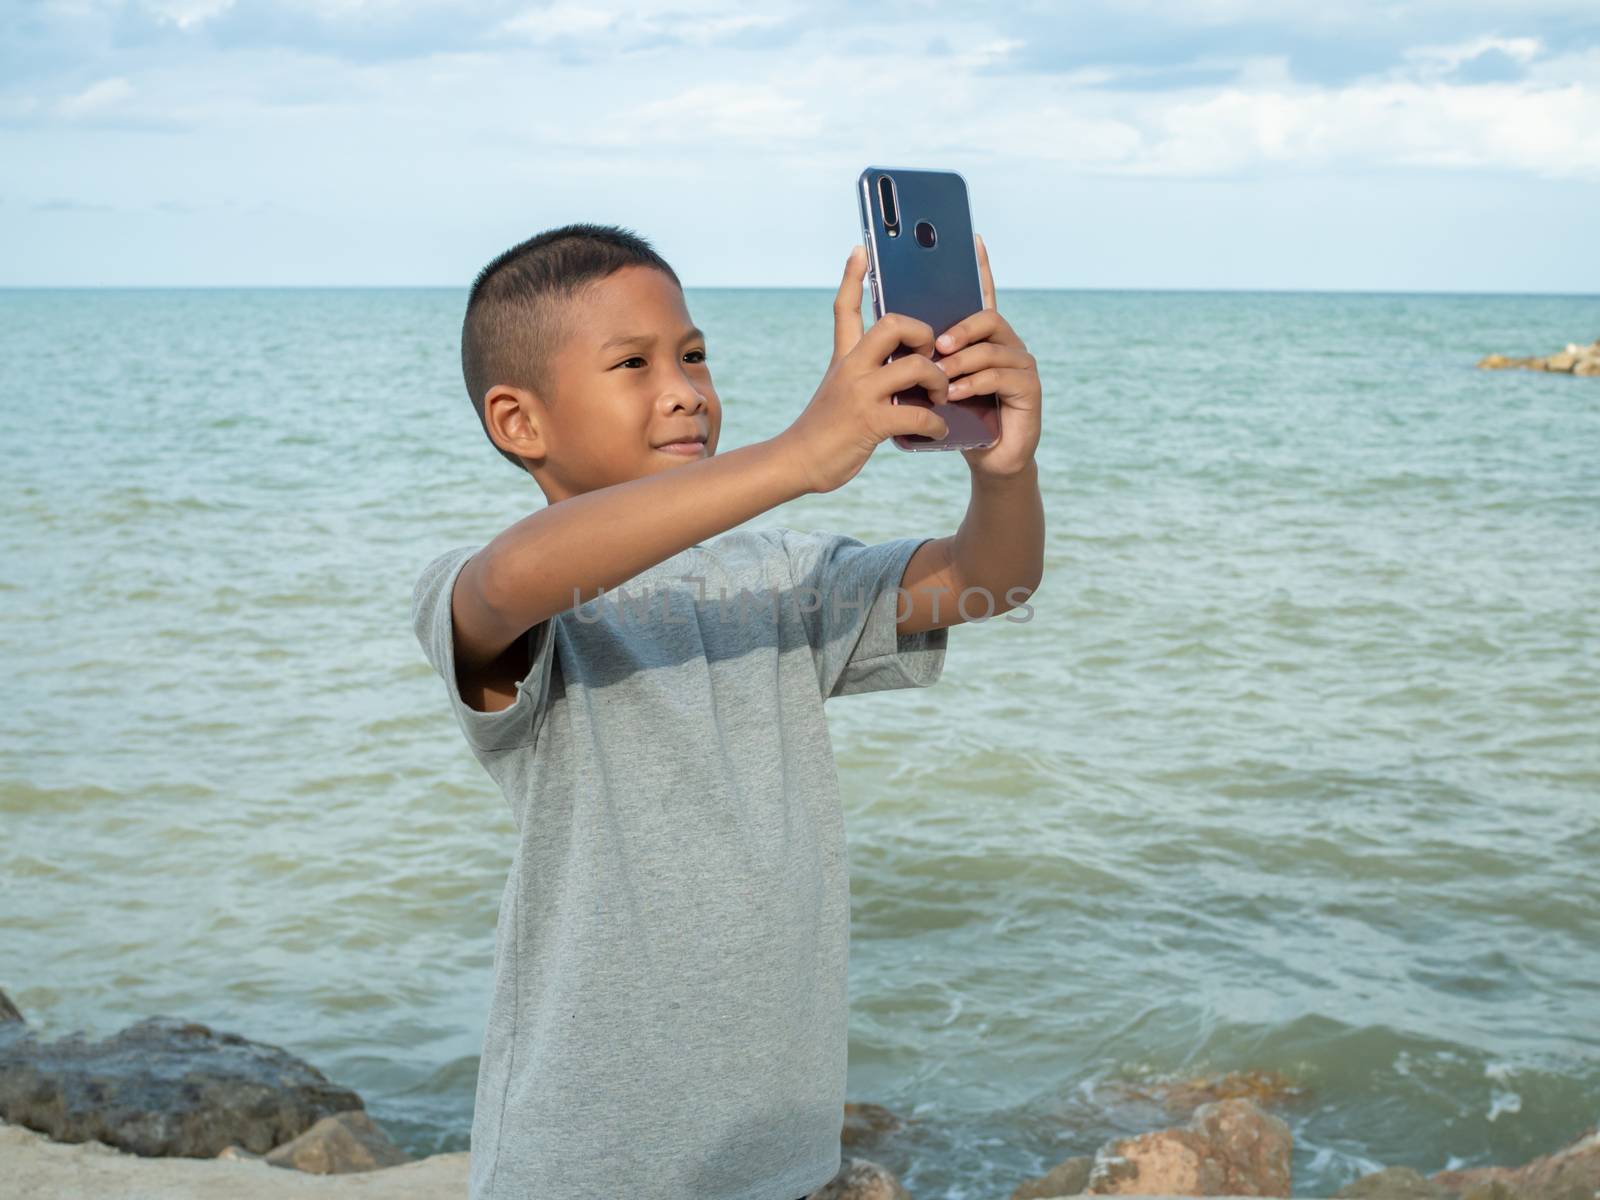 A boy using a phone to take a selfie on a sea background by Unimages2527